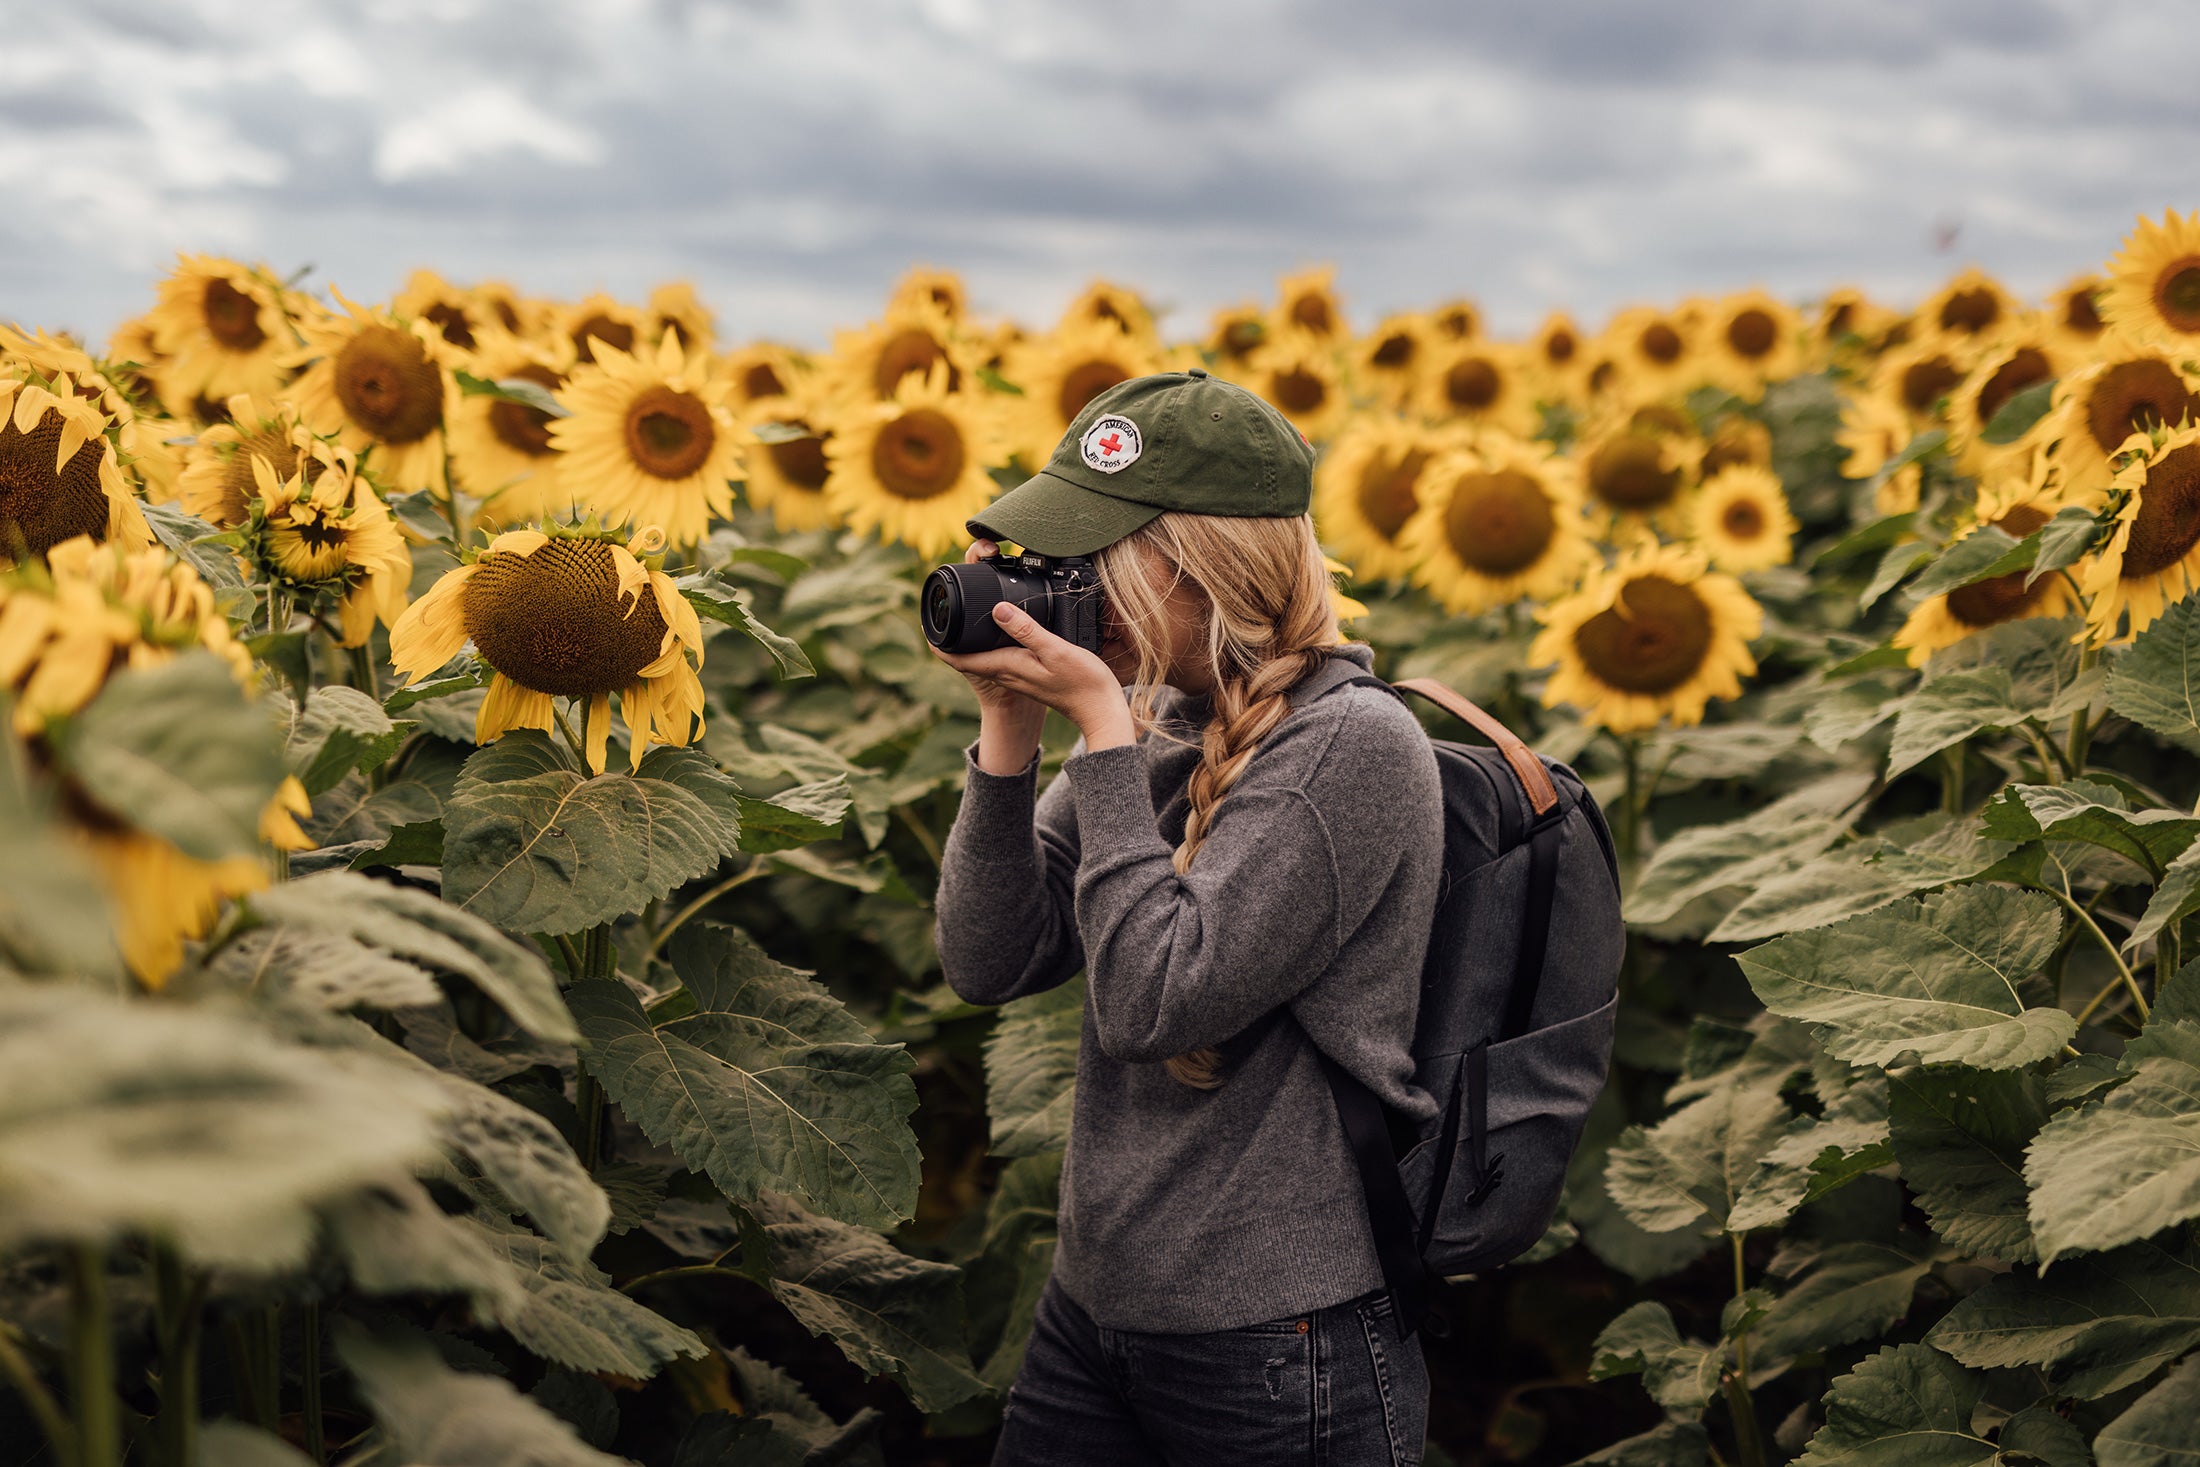 A girl stands in a field of sunflowers with a camera and SIGMA 23mm F1.4 DC DN | Contemporary lens